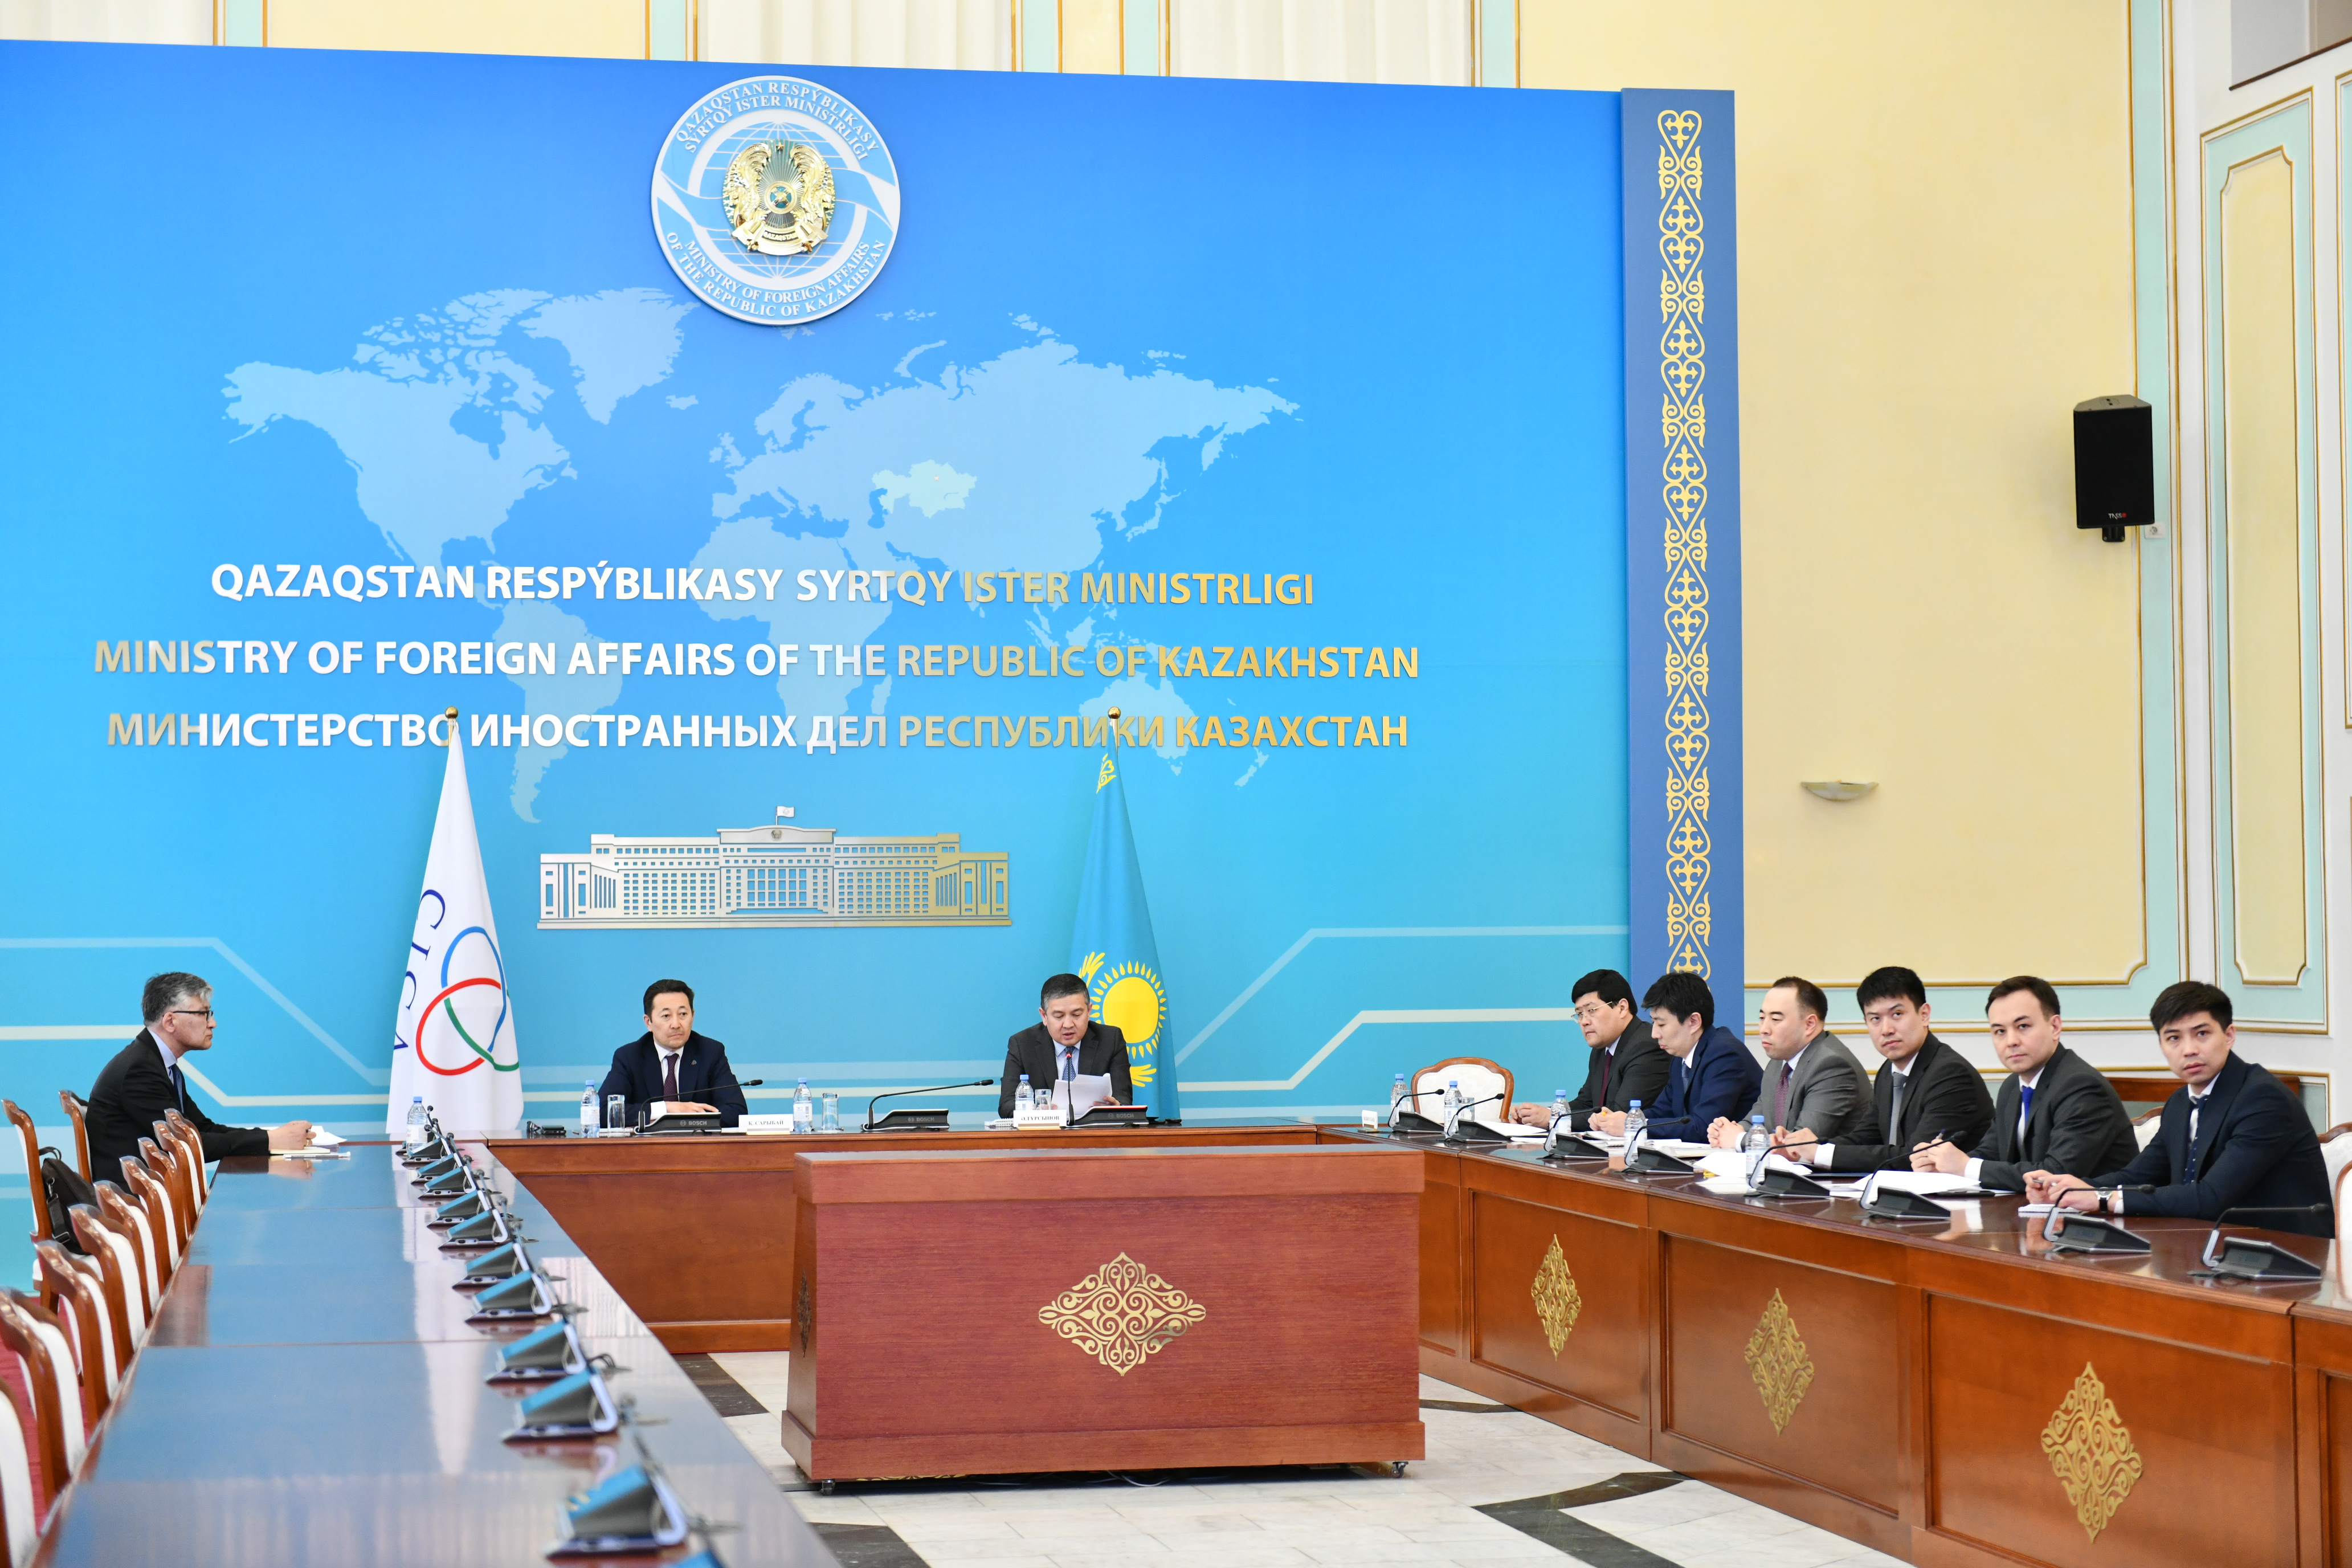 Briefing on Topical Issues of CICA Was Held with the Diplomatic Missions of Kazakhstan